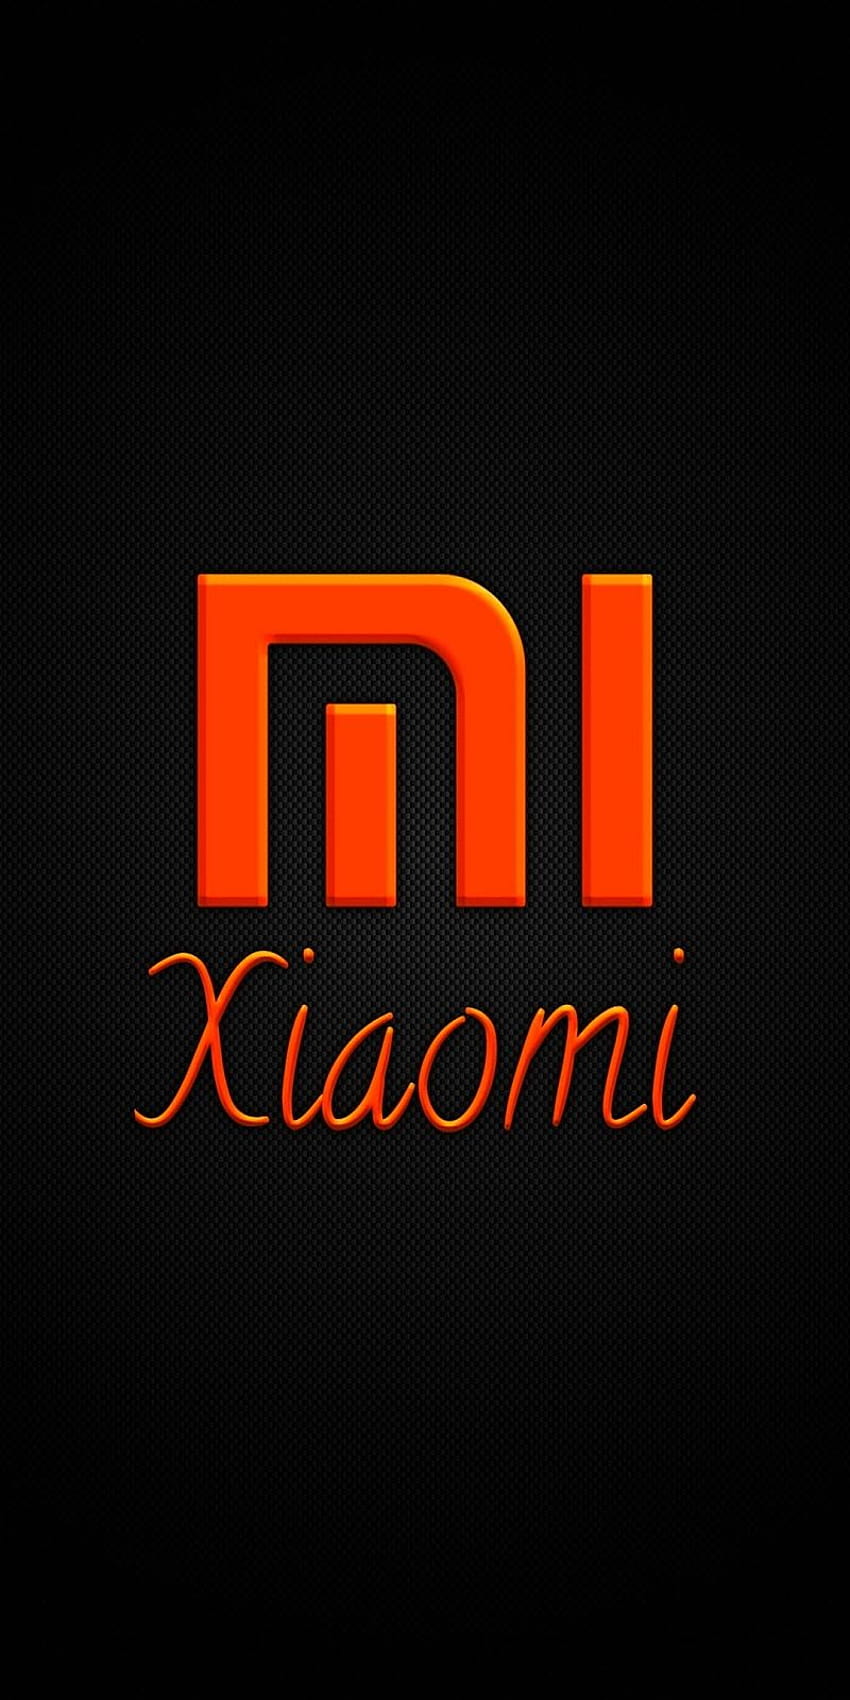 Financial Report of Xiaomi For The First Quarter Of 2020: Overview